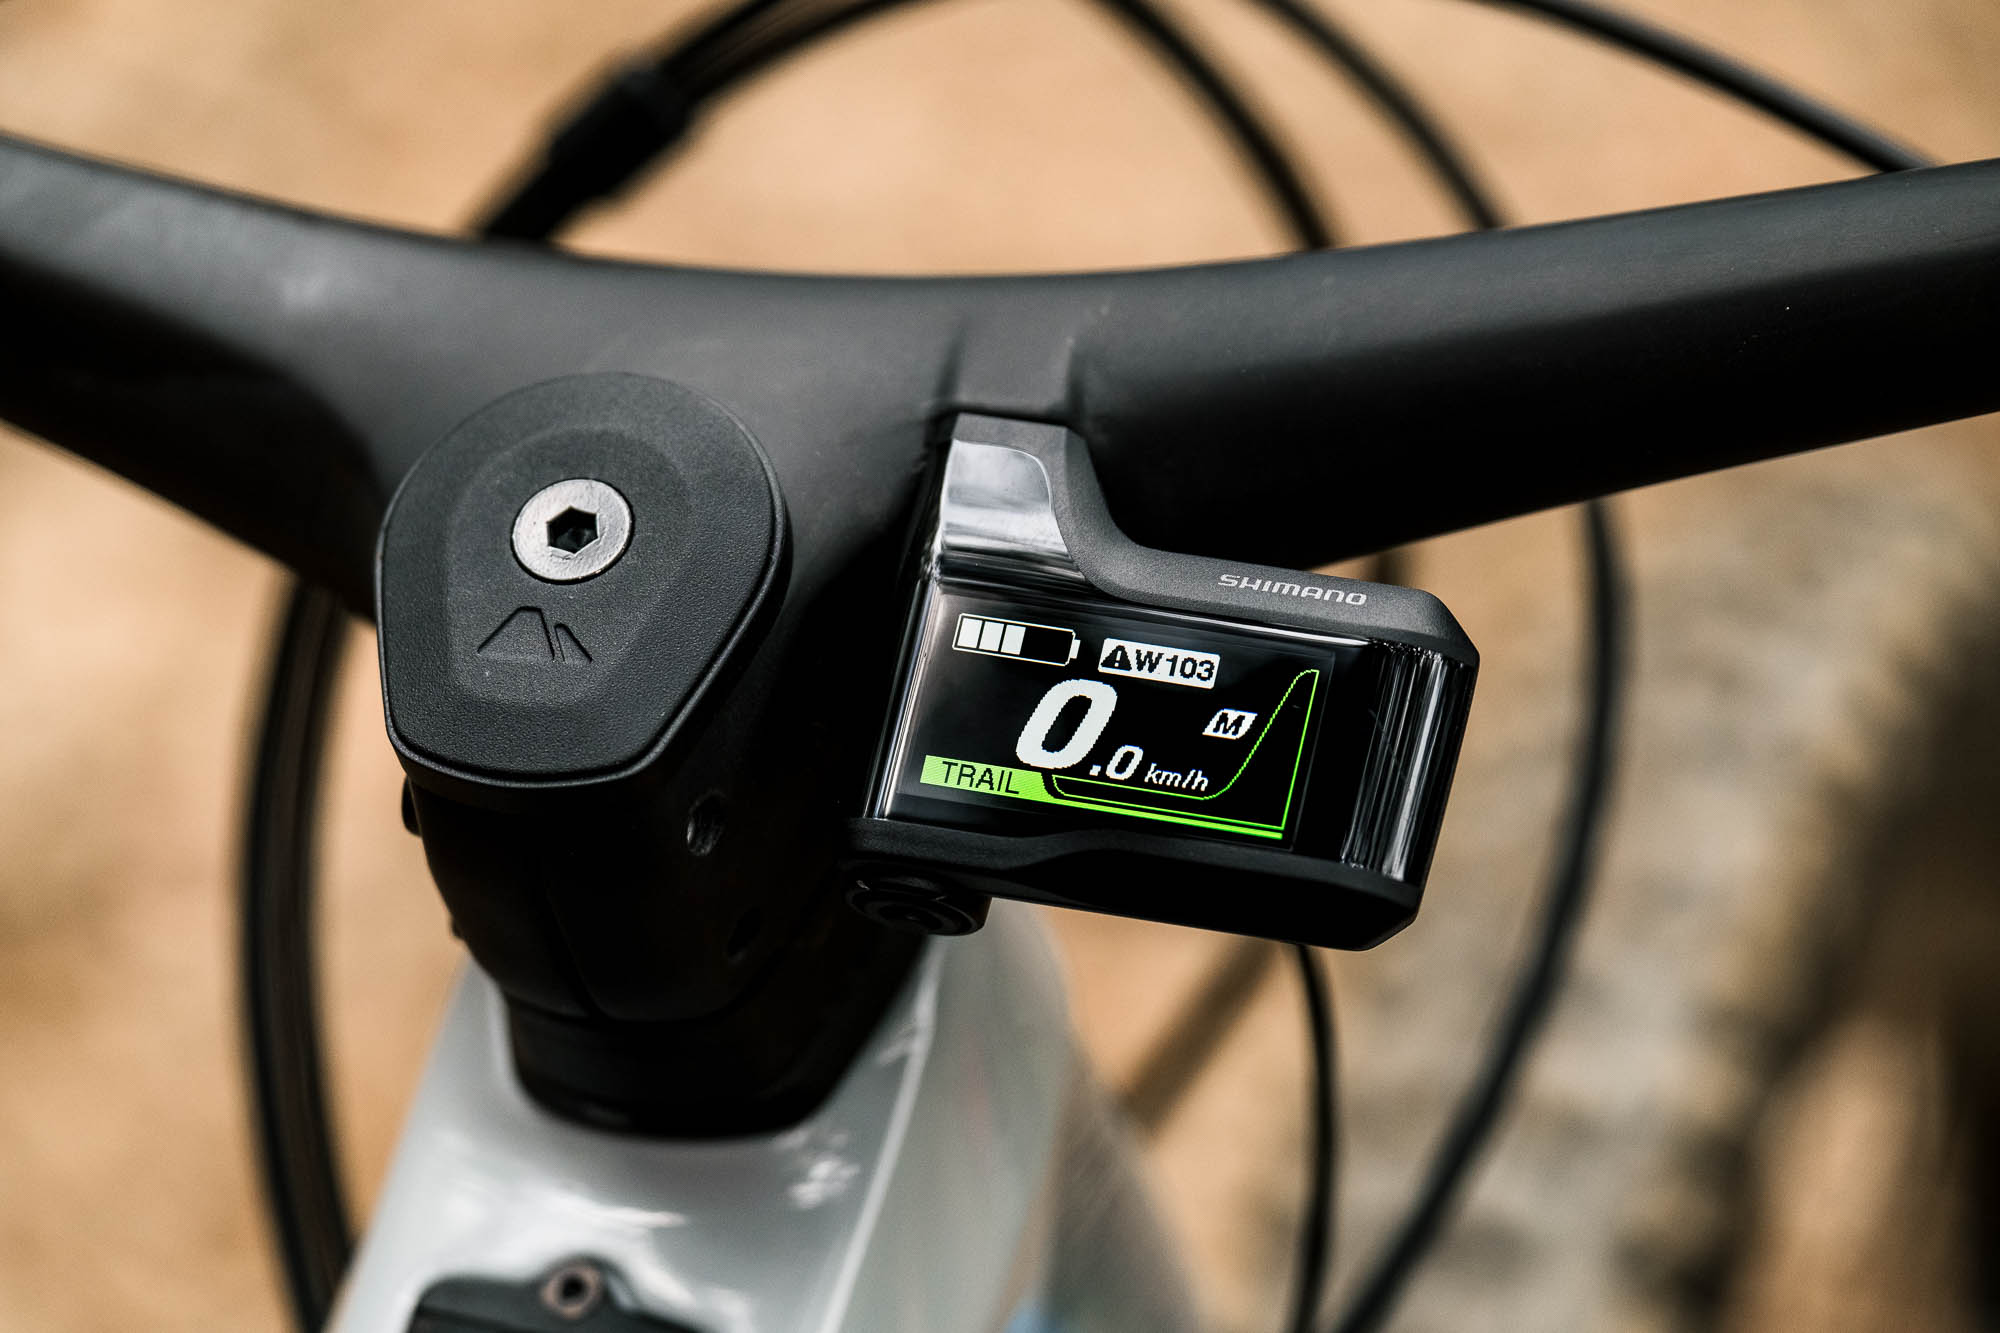 Check the display panel on the bike for any error codes or messages related to the motor.
Ensure that the motor is properly connected to the bike's electrical system.